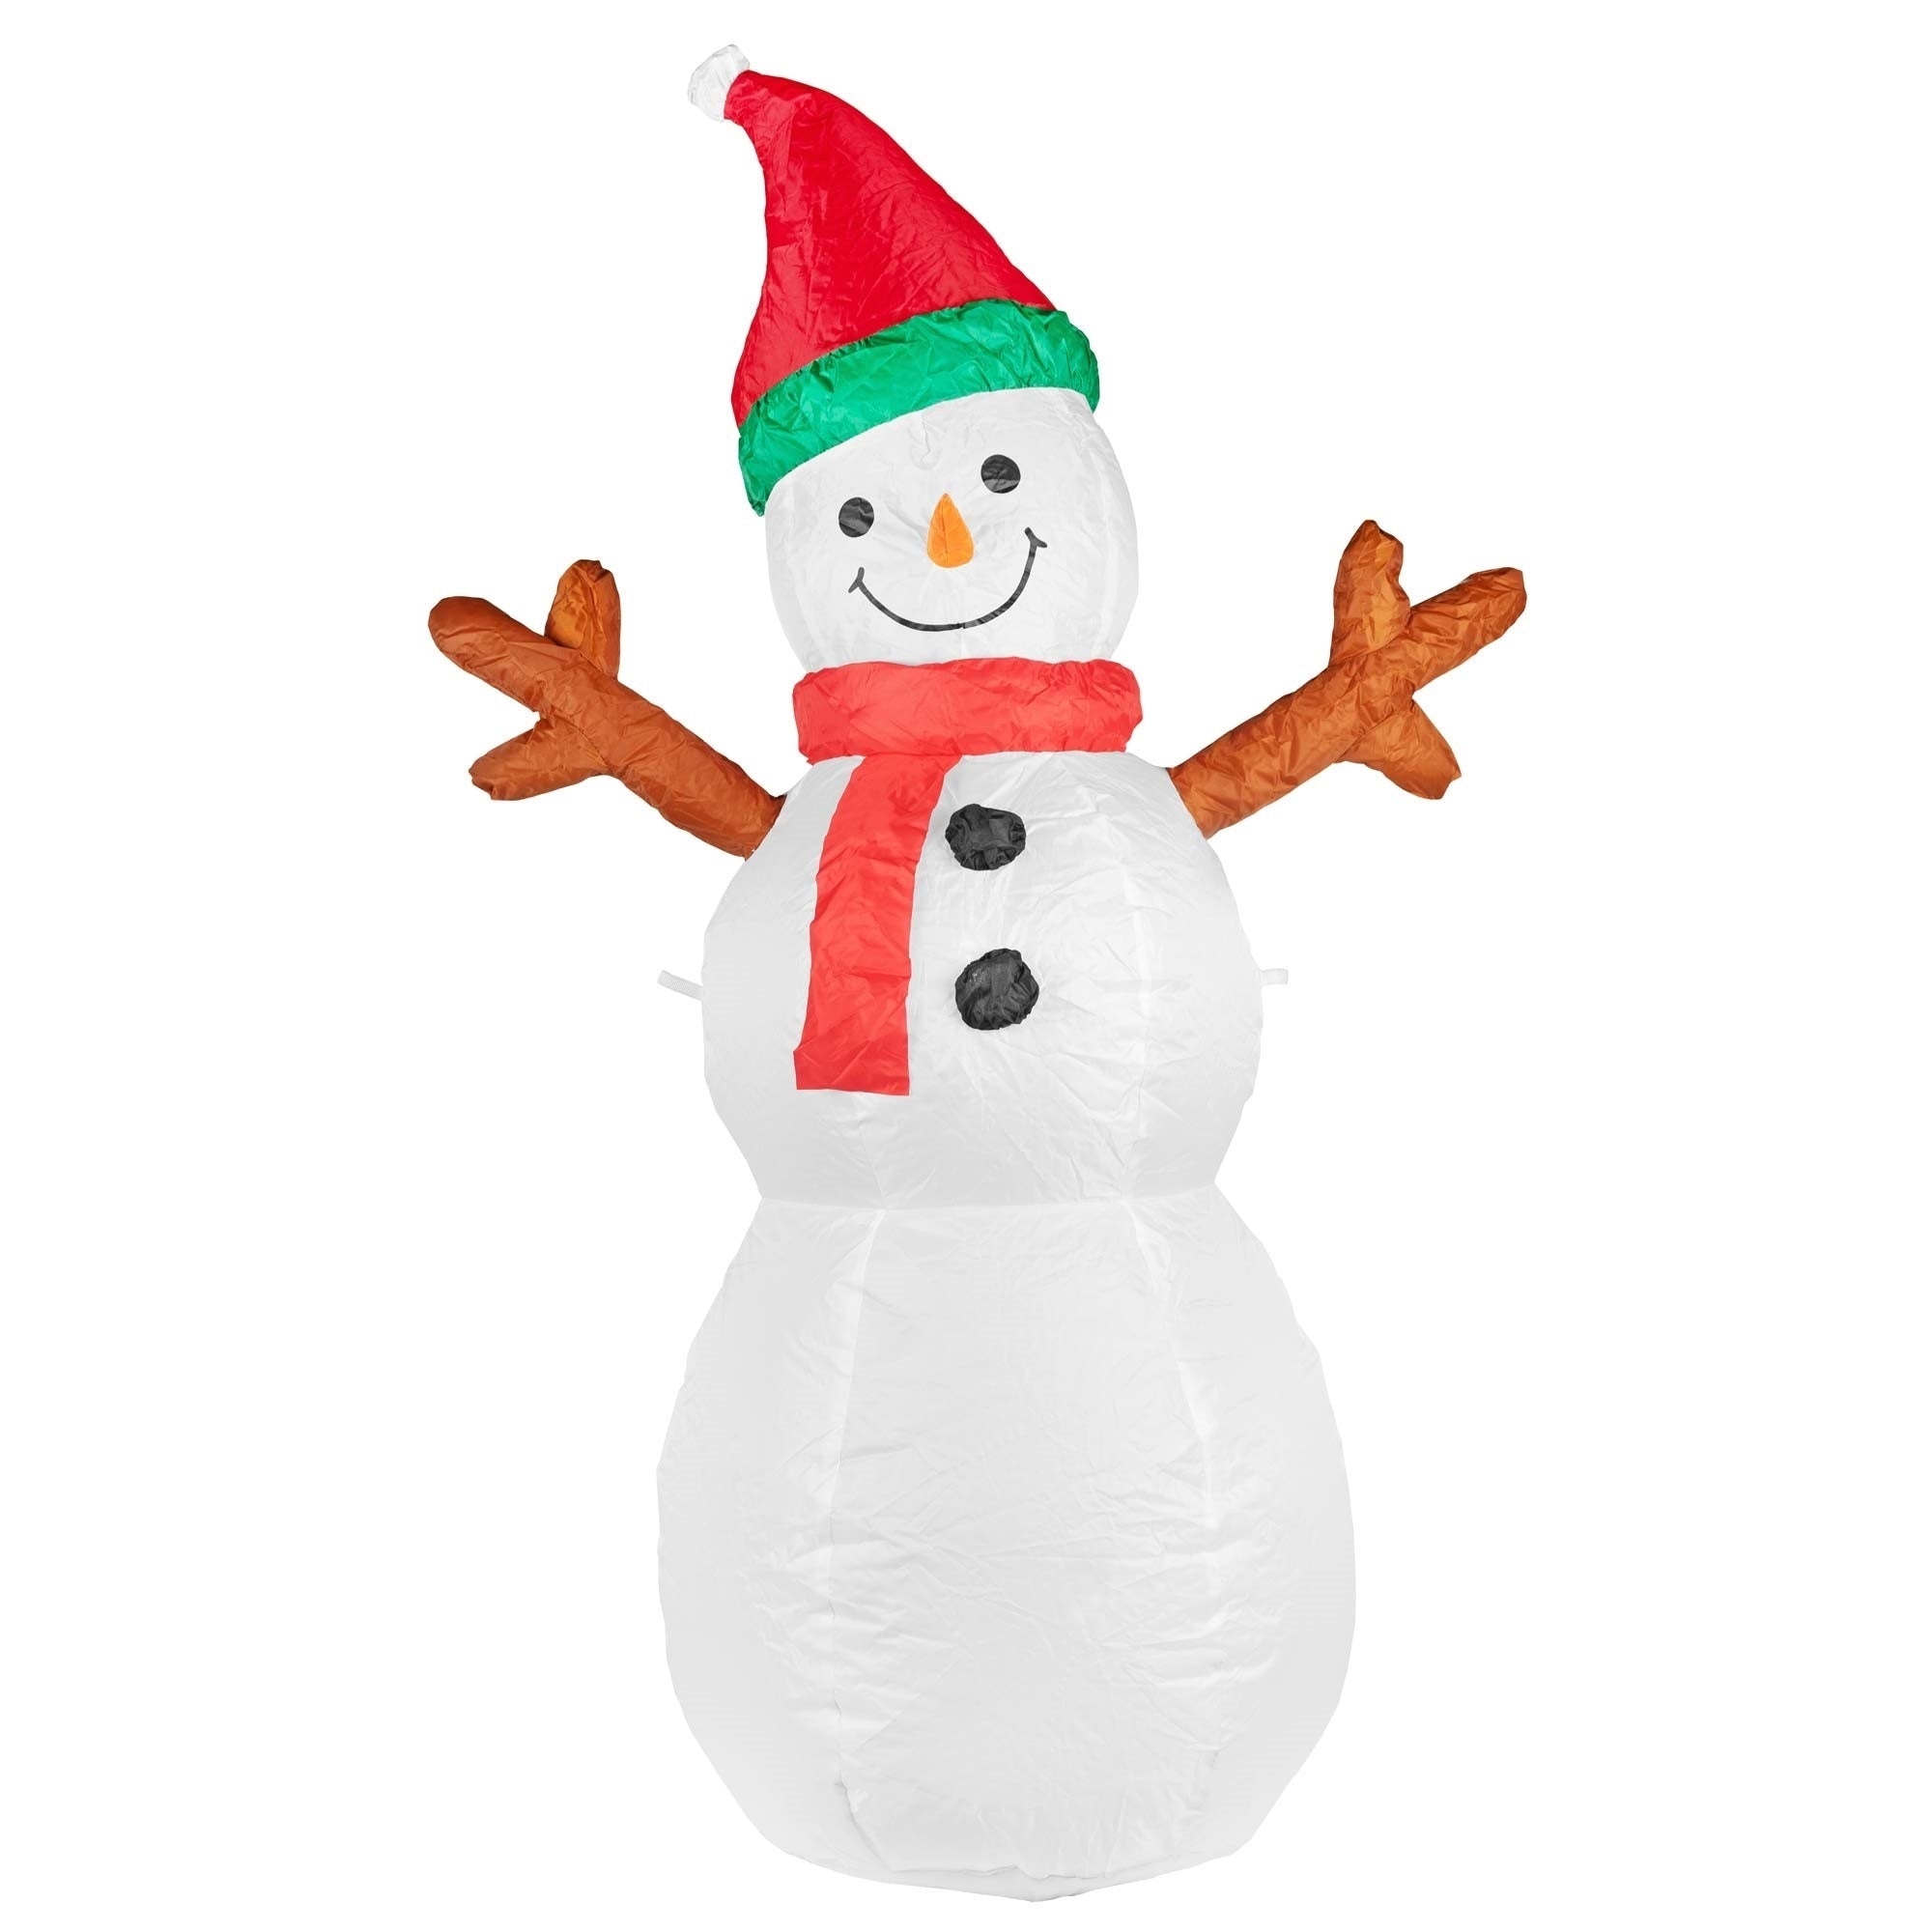 ProductWorks Candy Cane Lane Inflatable Snowman Outdoor Display, 4'